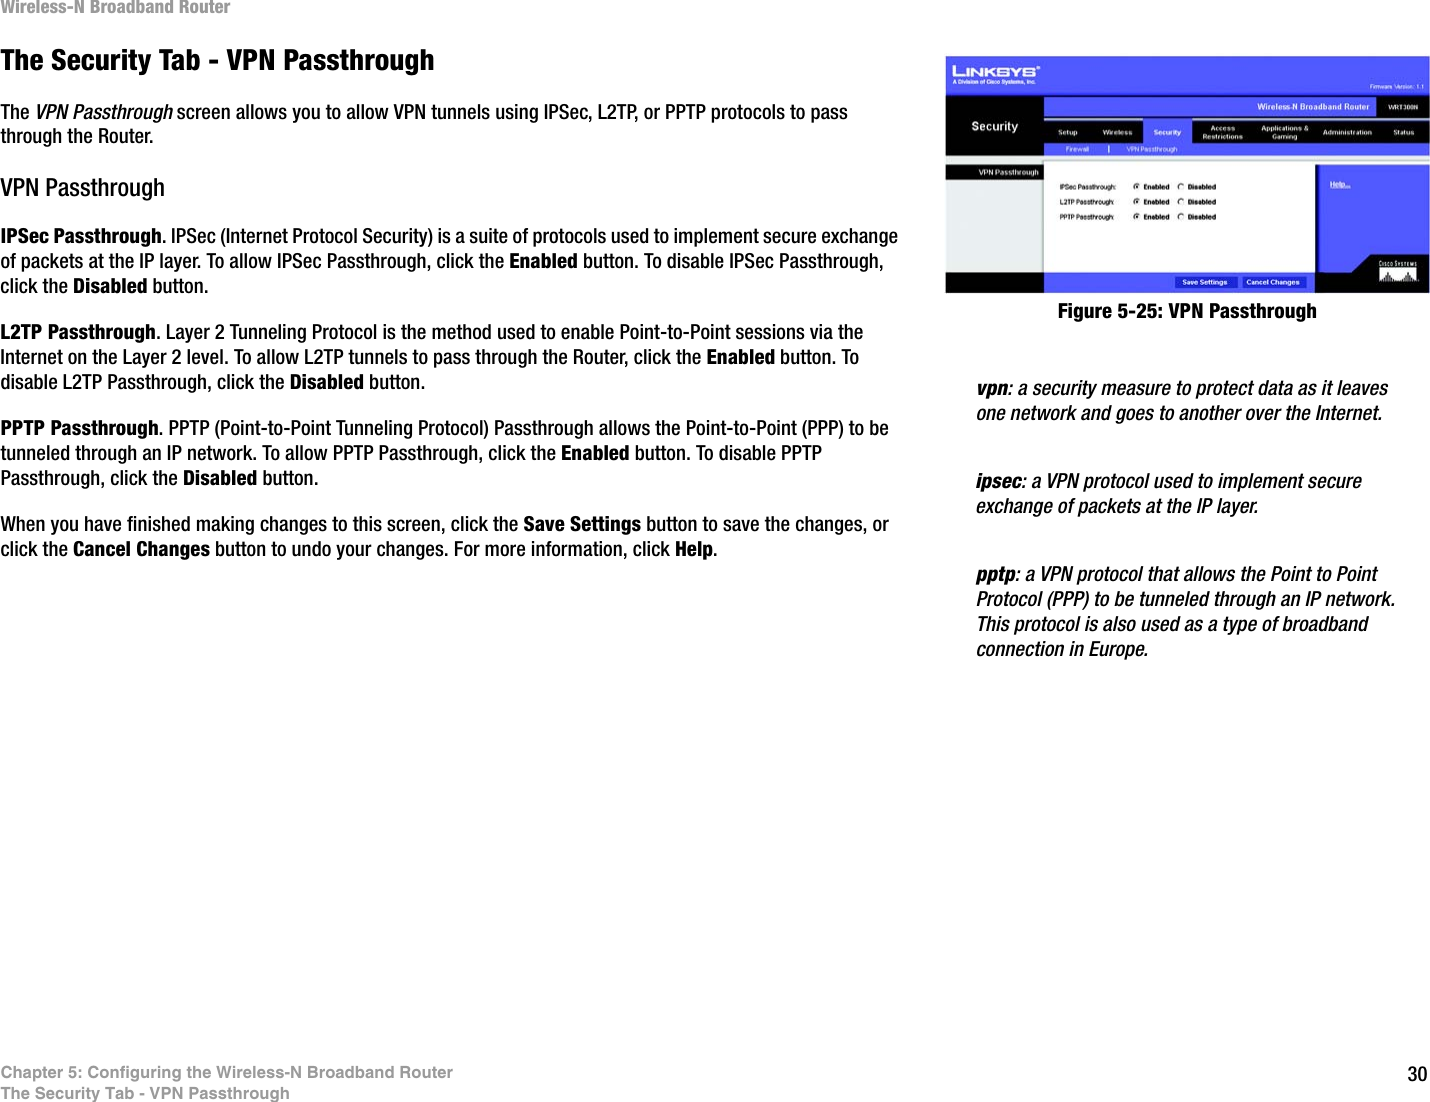 30Chapter 5: Configuring the Wireless-N Broadband RouterThe Security Tab - VPN PassthroughWireless-N Broadband RouterThe Security Tab - VPN PassthroughThe VPN Passthrough screen allows you to allow VPN tunnels using IPSec, L2TP, or PPTP protocols to pass through the Router.VPN PassthroughIPSec Passthrough. IPSec (Internet Protocol Security) is a suite of protocols used to implement secure exchange of packets at the IP layer. To allow IPSec Passthrough, click the Enabled button. To disable IPSec Passthrough, click the Disabled button.L2TP Passthrough. Layer 2 Tunneling Protocol is the method used to enable Point-to-Point sessions via the Internet on the Layer 2 level. To allow L2TP tunnels to pass through the Router, click the Enabled button. To disable L2TP Passthrough, click the Disabled button.PPTP Passthrough. PPTP (Point-to-Point Tunneling Protocol) Passthrough allows the Point-to-Point (PPP) to be tunneled through an IP network. To allow PPTP Passthrough, click the Enabled button. To disable PPTP Passthrough, click the Disabled button.When you have finished making changes to this screen, click the Save Settings button to save the changes, or click the Cancel Changes button to undo your changes. For more information, click Help.Figure 5-25: VPN Passthroughipsec: a VPN protocol used to implement secure exchange of packets at the IP layer.pptp: a VPN protocol that allows the Point to Point Protocol (PPP) to be tunneled through an IP network. This protocol is also used as a type of broadband connection in Europe.vpn: a security measure to protect data as it leaves one network and goes to another over the Internet.